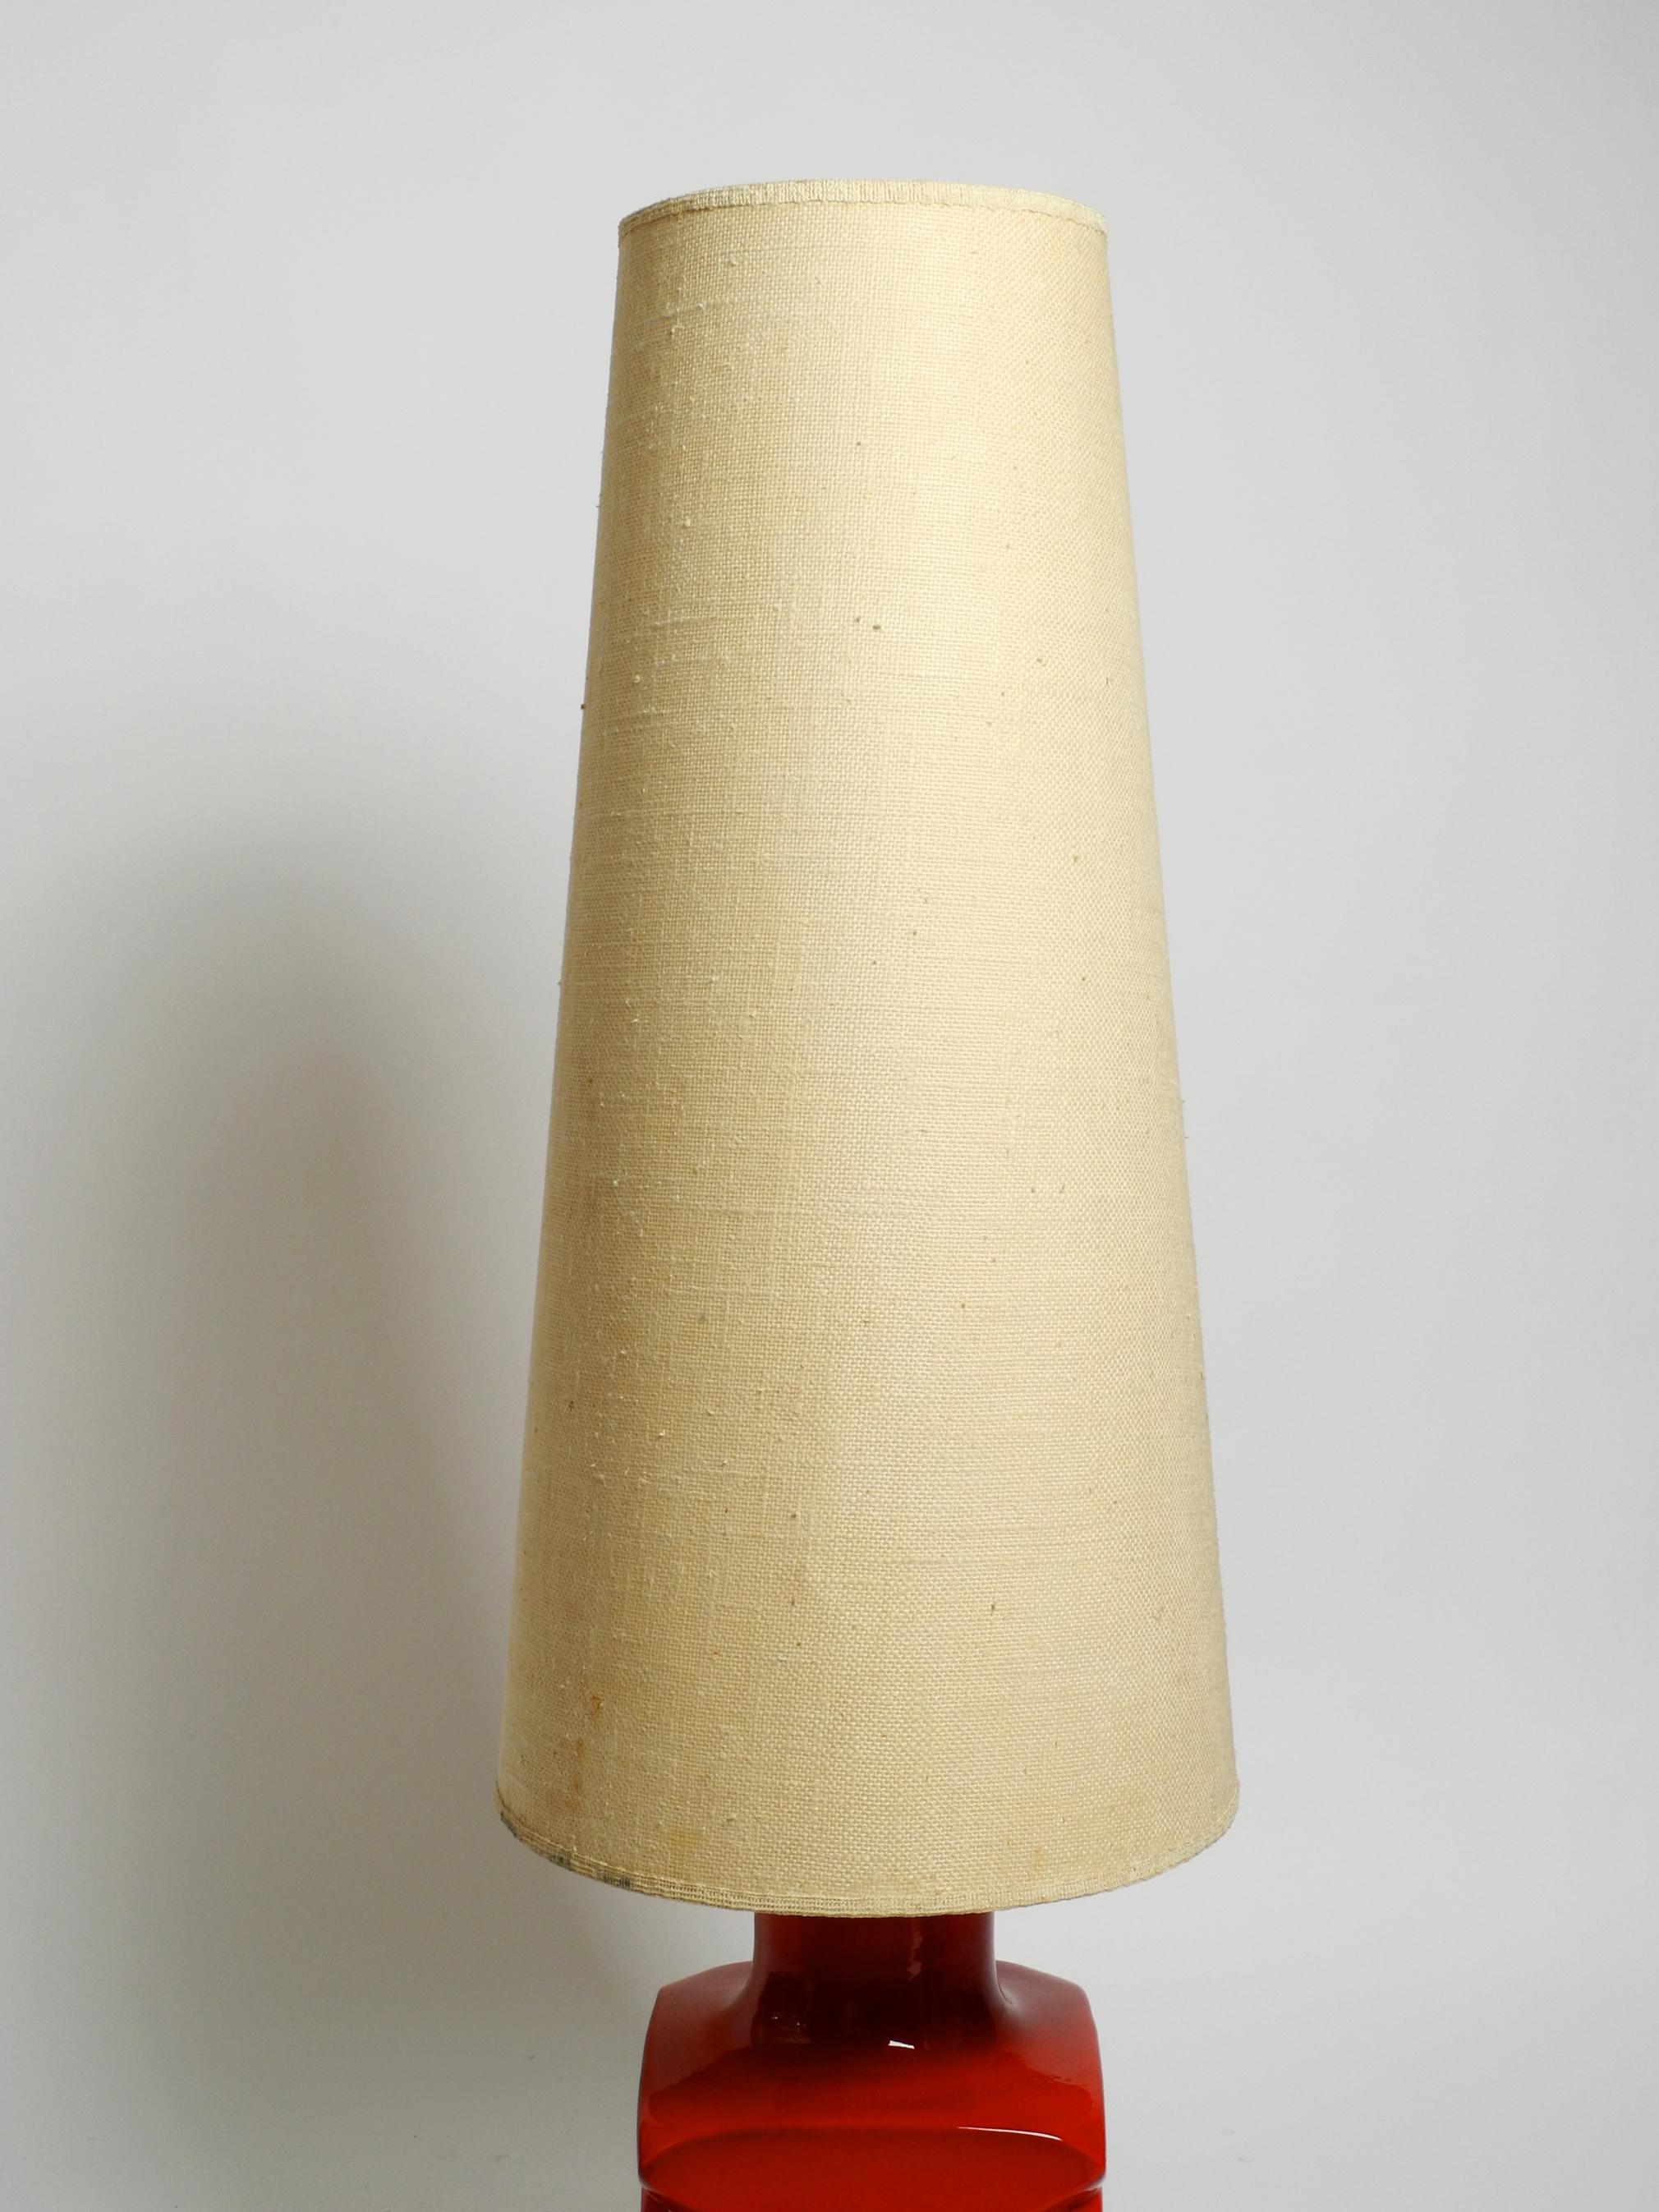 large red lamp shade